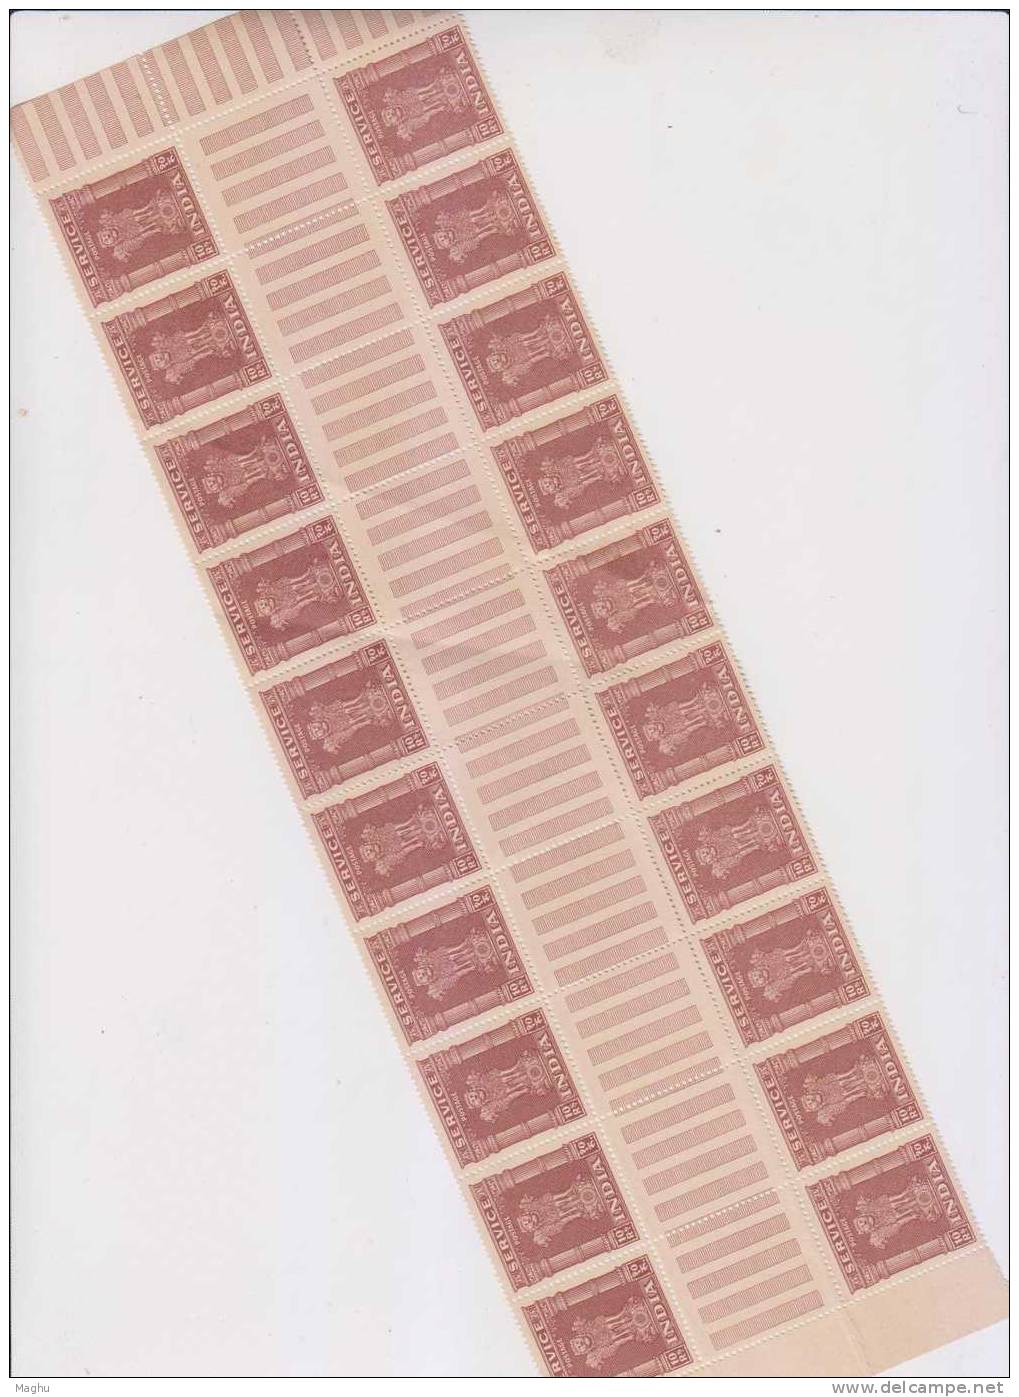 Gutter Block Of 20, Veriety / EFO,  Error With SIDEWAYS Asokan Watermark, India 1958 -1971 Service / Official, As Scan - Timbres De Service